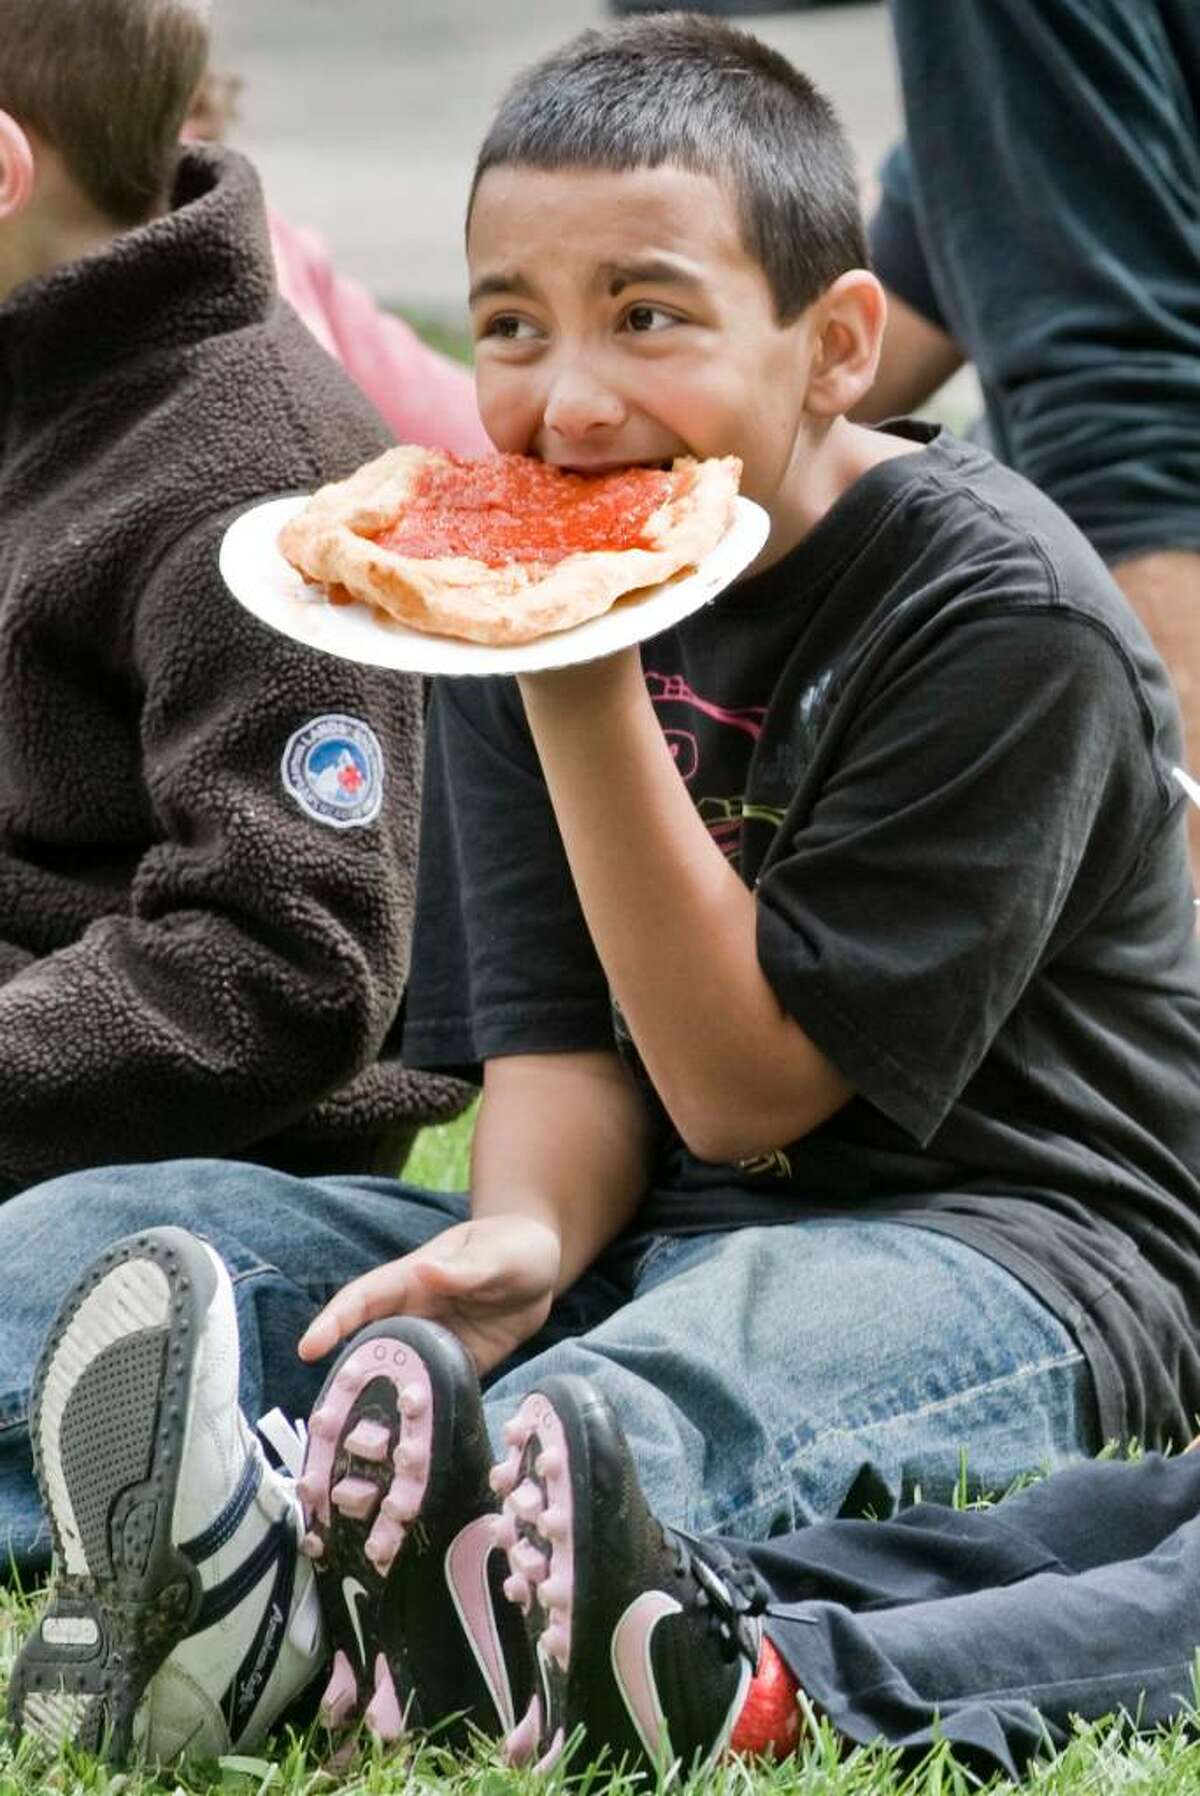 10 year old Andrew Larkin of New Milford enjoys a bite while watching the festivities during the Taste of Danbury at the CityCenter Green. Saturday, Sept. 12, 2009